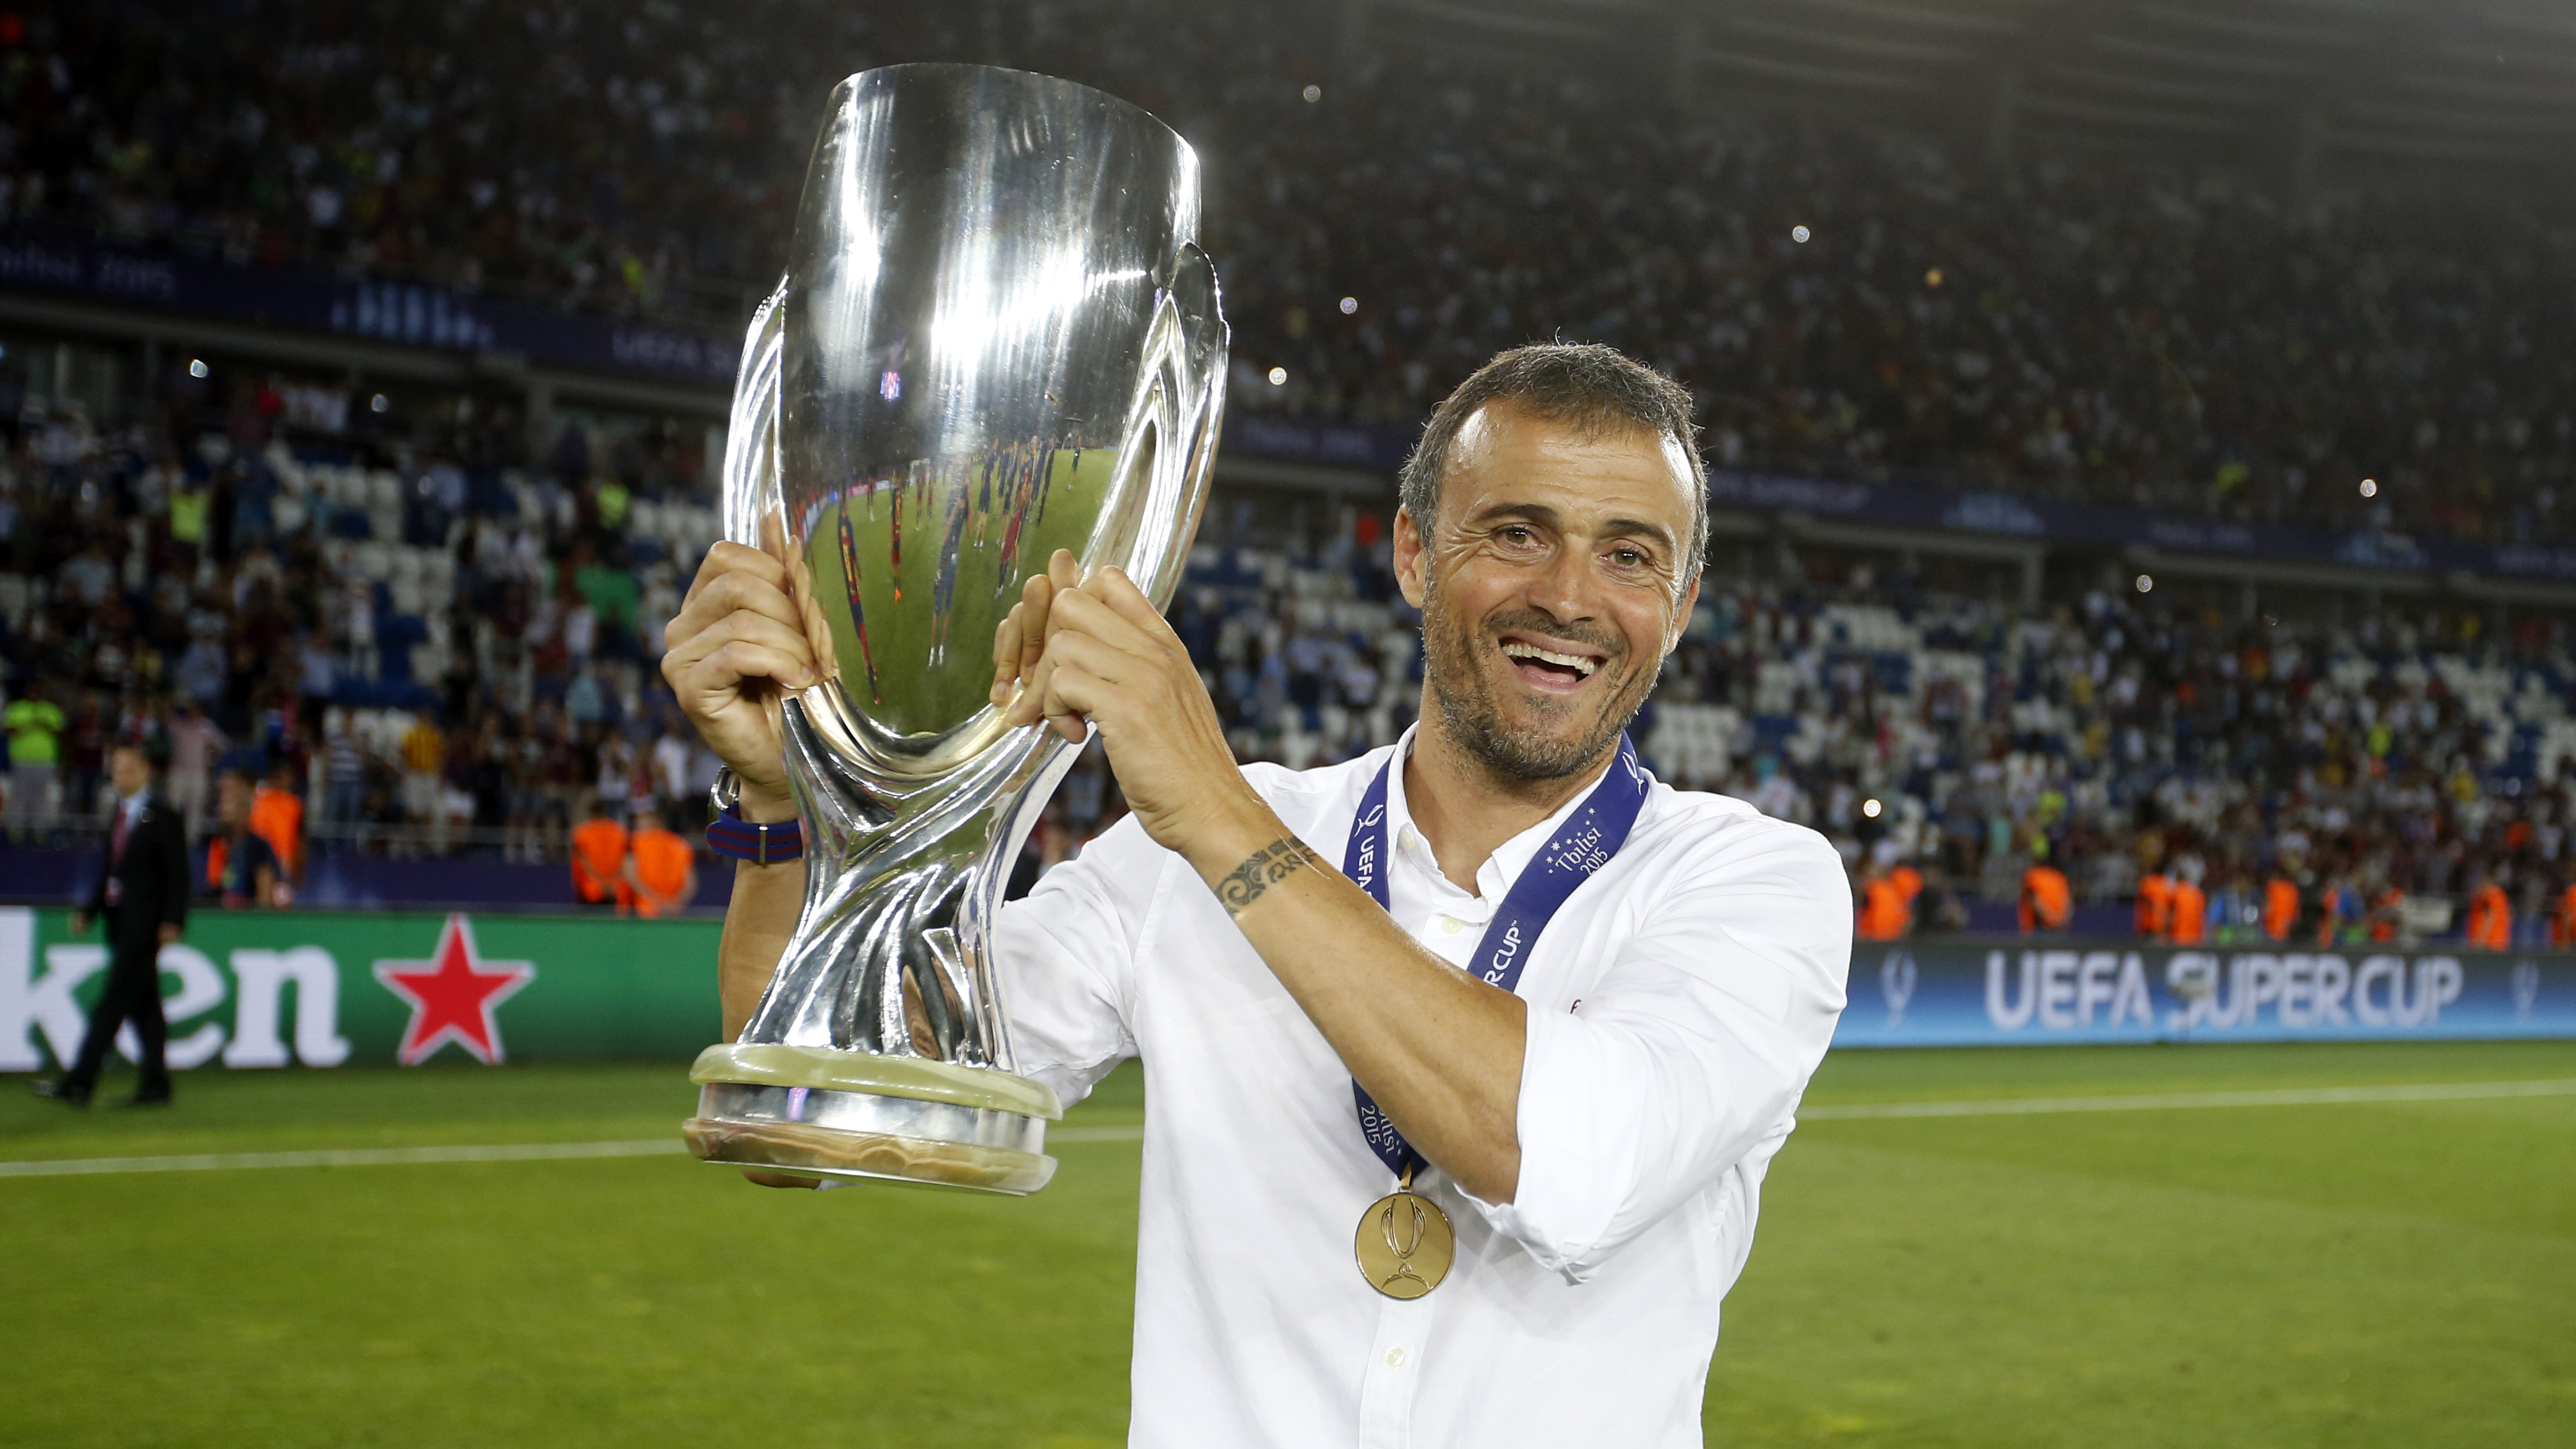 Luis Enrique becomes fourth winner of European Super Cup as player and  manager